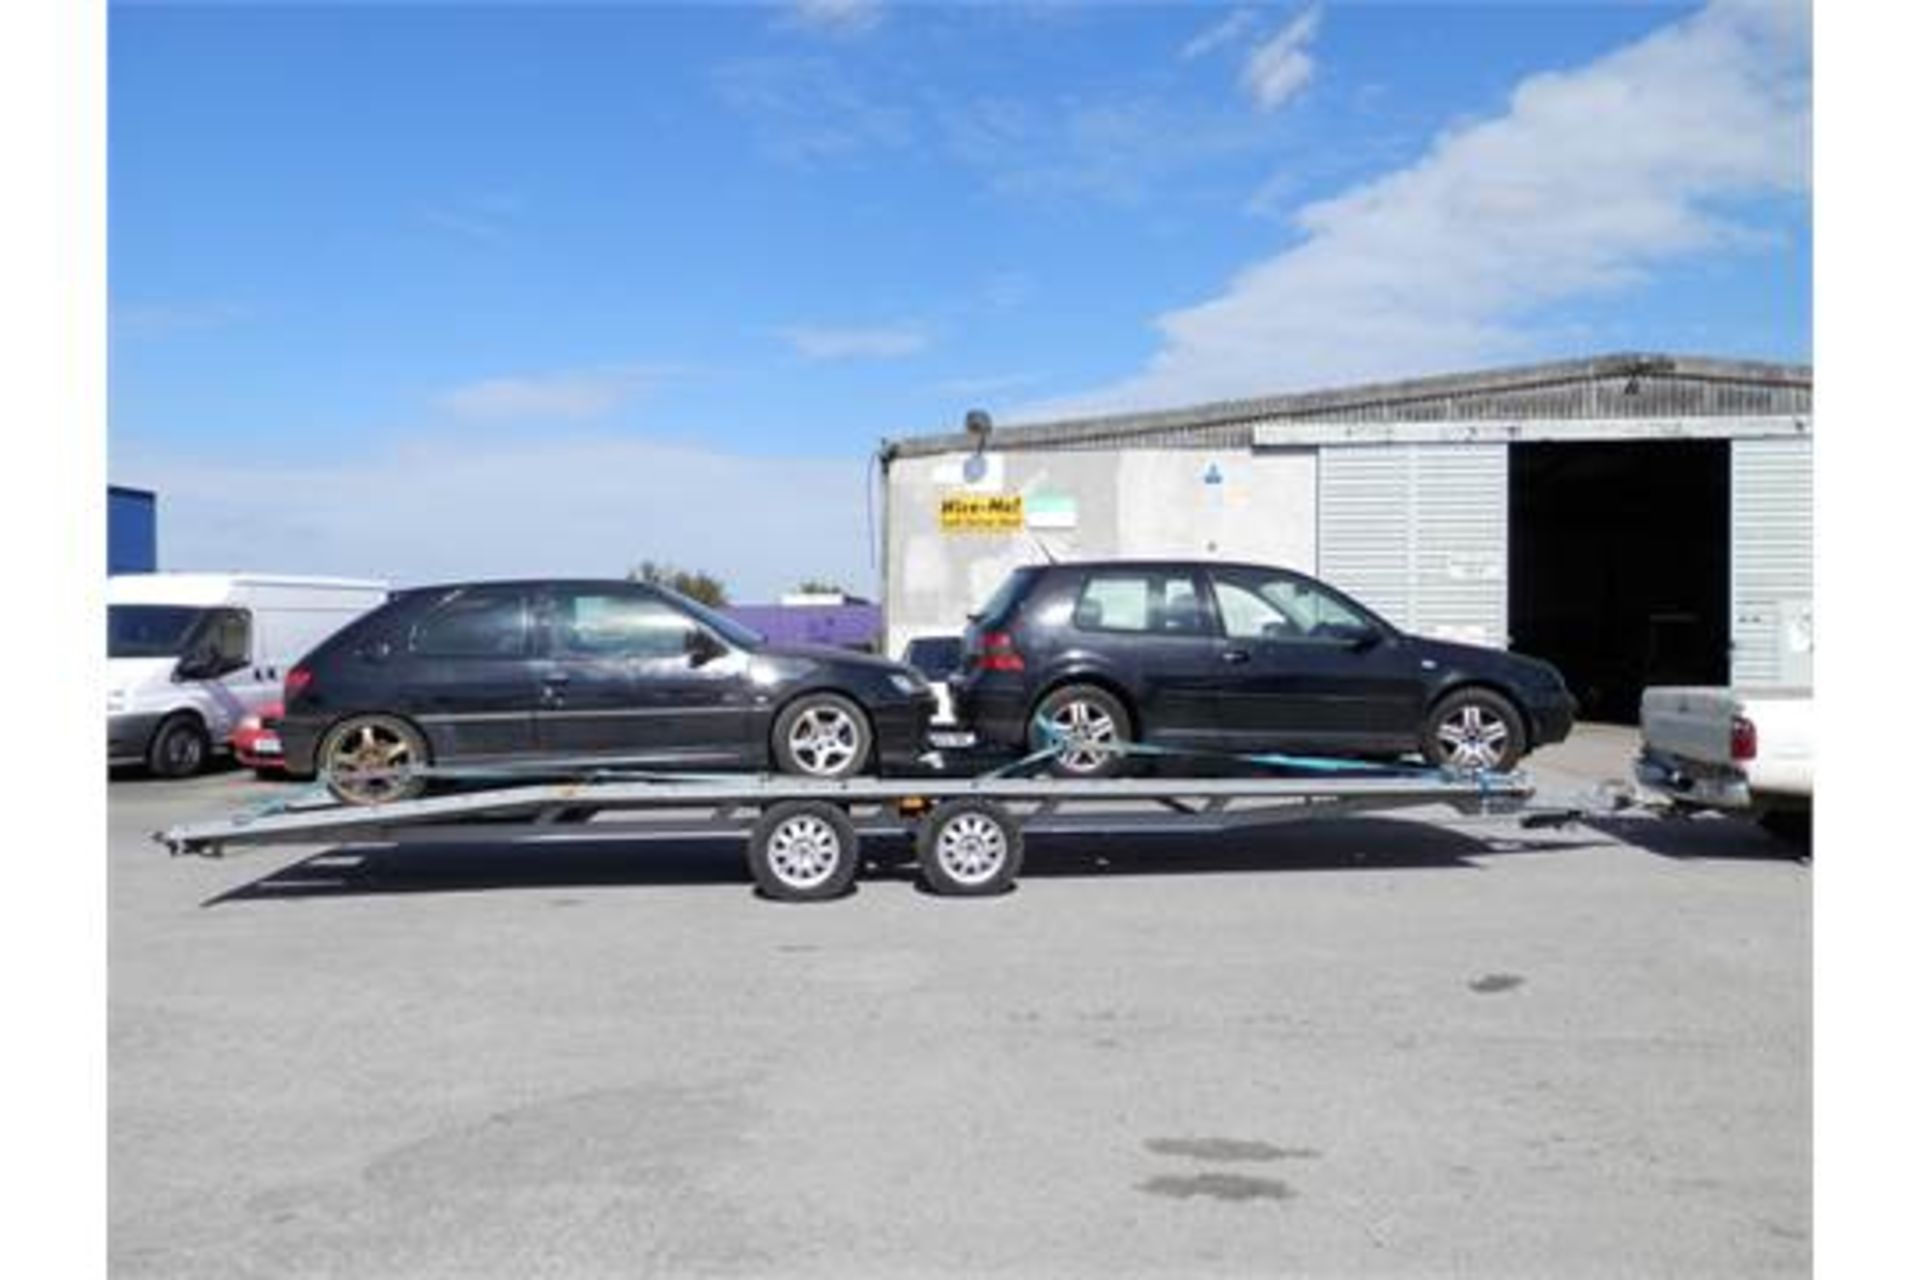 3400KG 2 CAR TRAILER, 2.5 TONNE CARRYING CAPACITY !! GOOD ALLOYS/TYRES & SPARE WHEEL. - Image 6 of 11